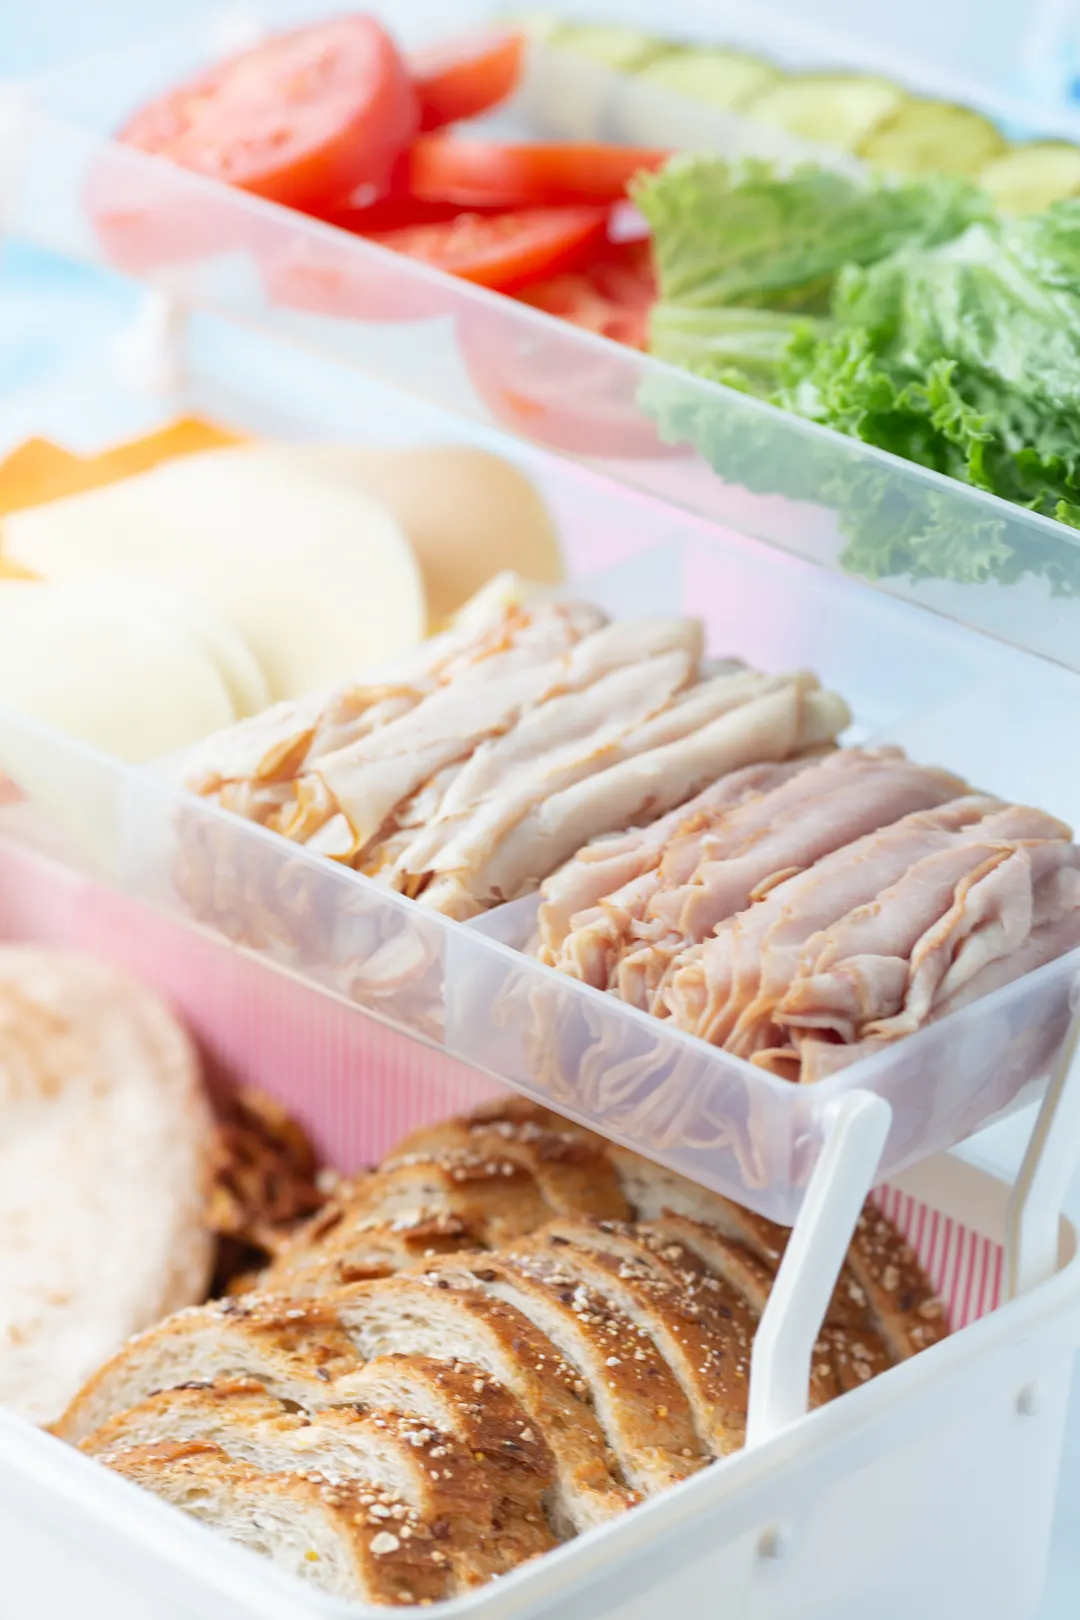 view inside of a Sandwich Tackle Box to showcase sandwich fixings including bread slices, lunch meats, sliced cheeses and vegetables.a